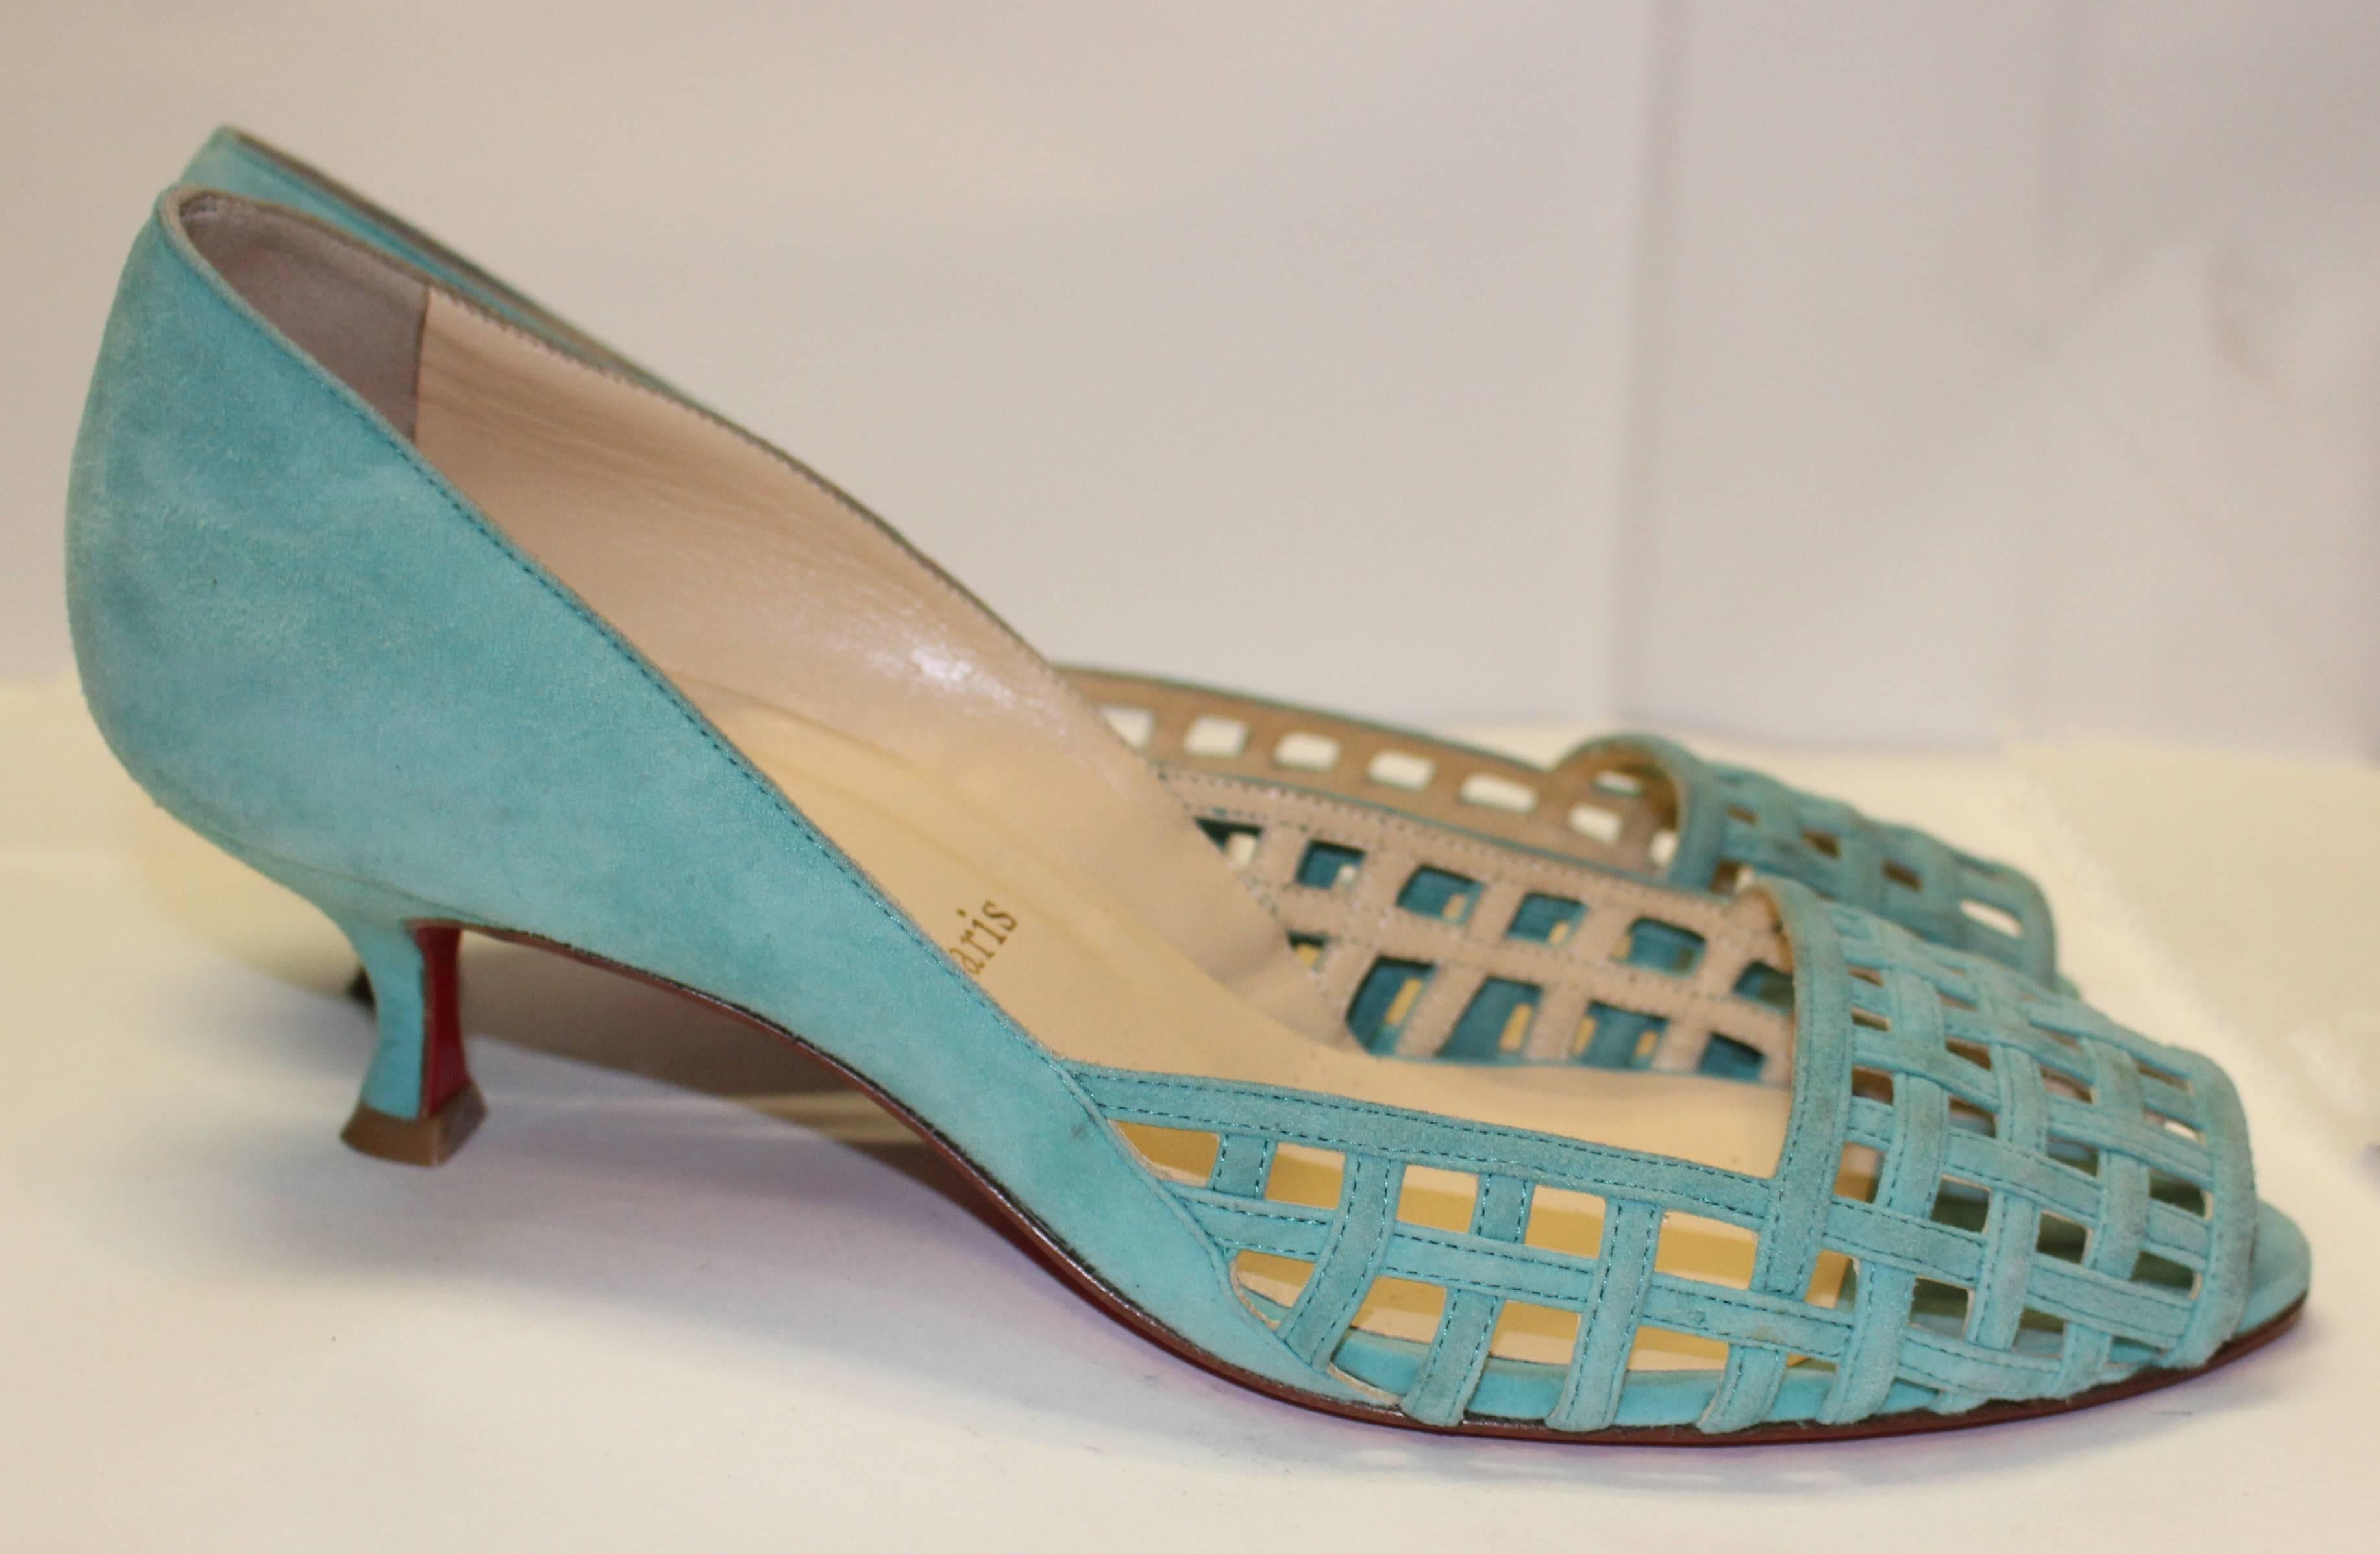 1990's Christian Louboutin Paris suede kitten heels. Sewn birdcage-design upper with peep toe. Made in Italy. Size 39.5. 

Measurements: 
Heel to toe: 10"
Palm of foot: 3 1/4"
Heel: 2" 